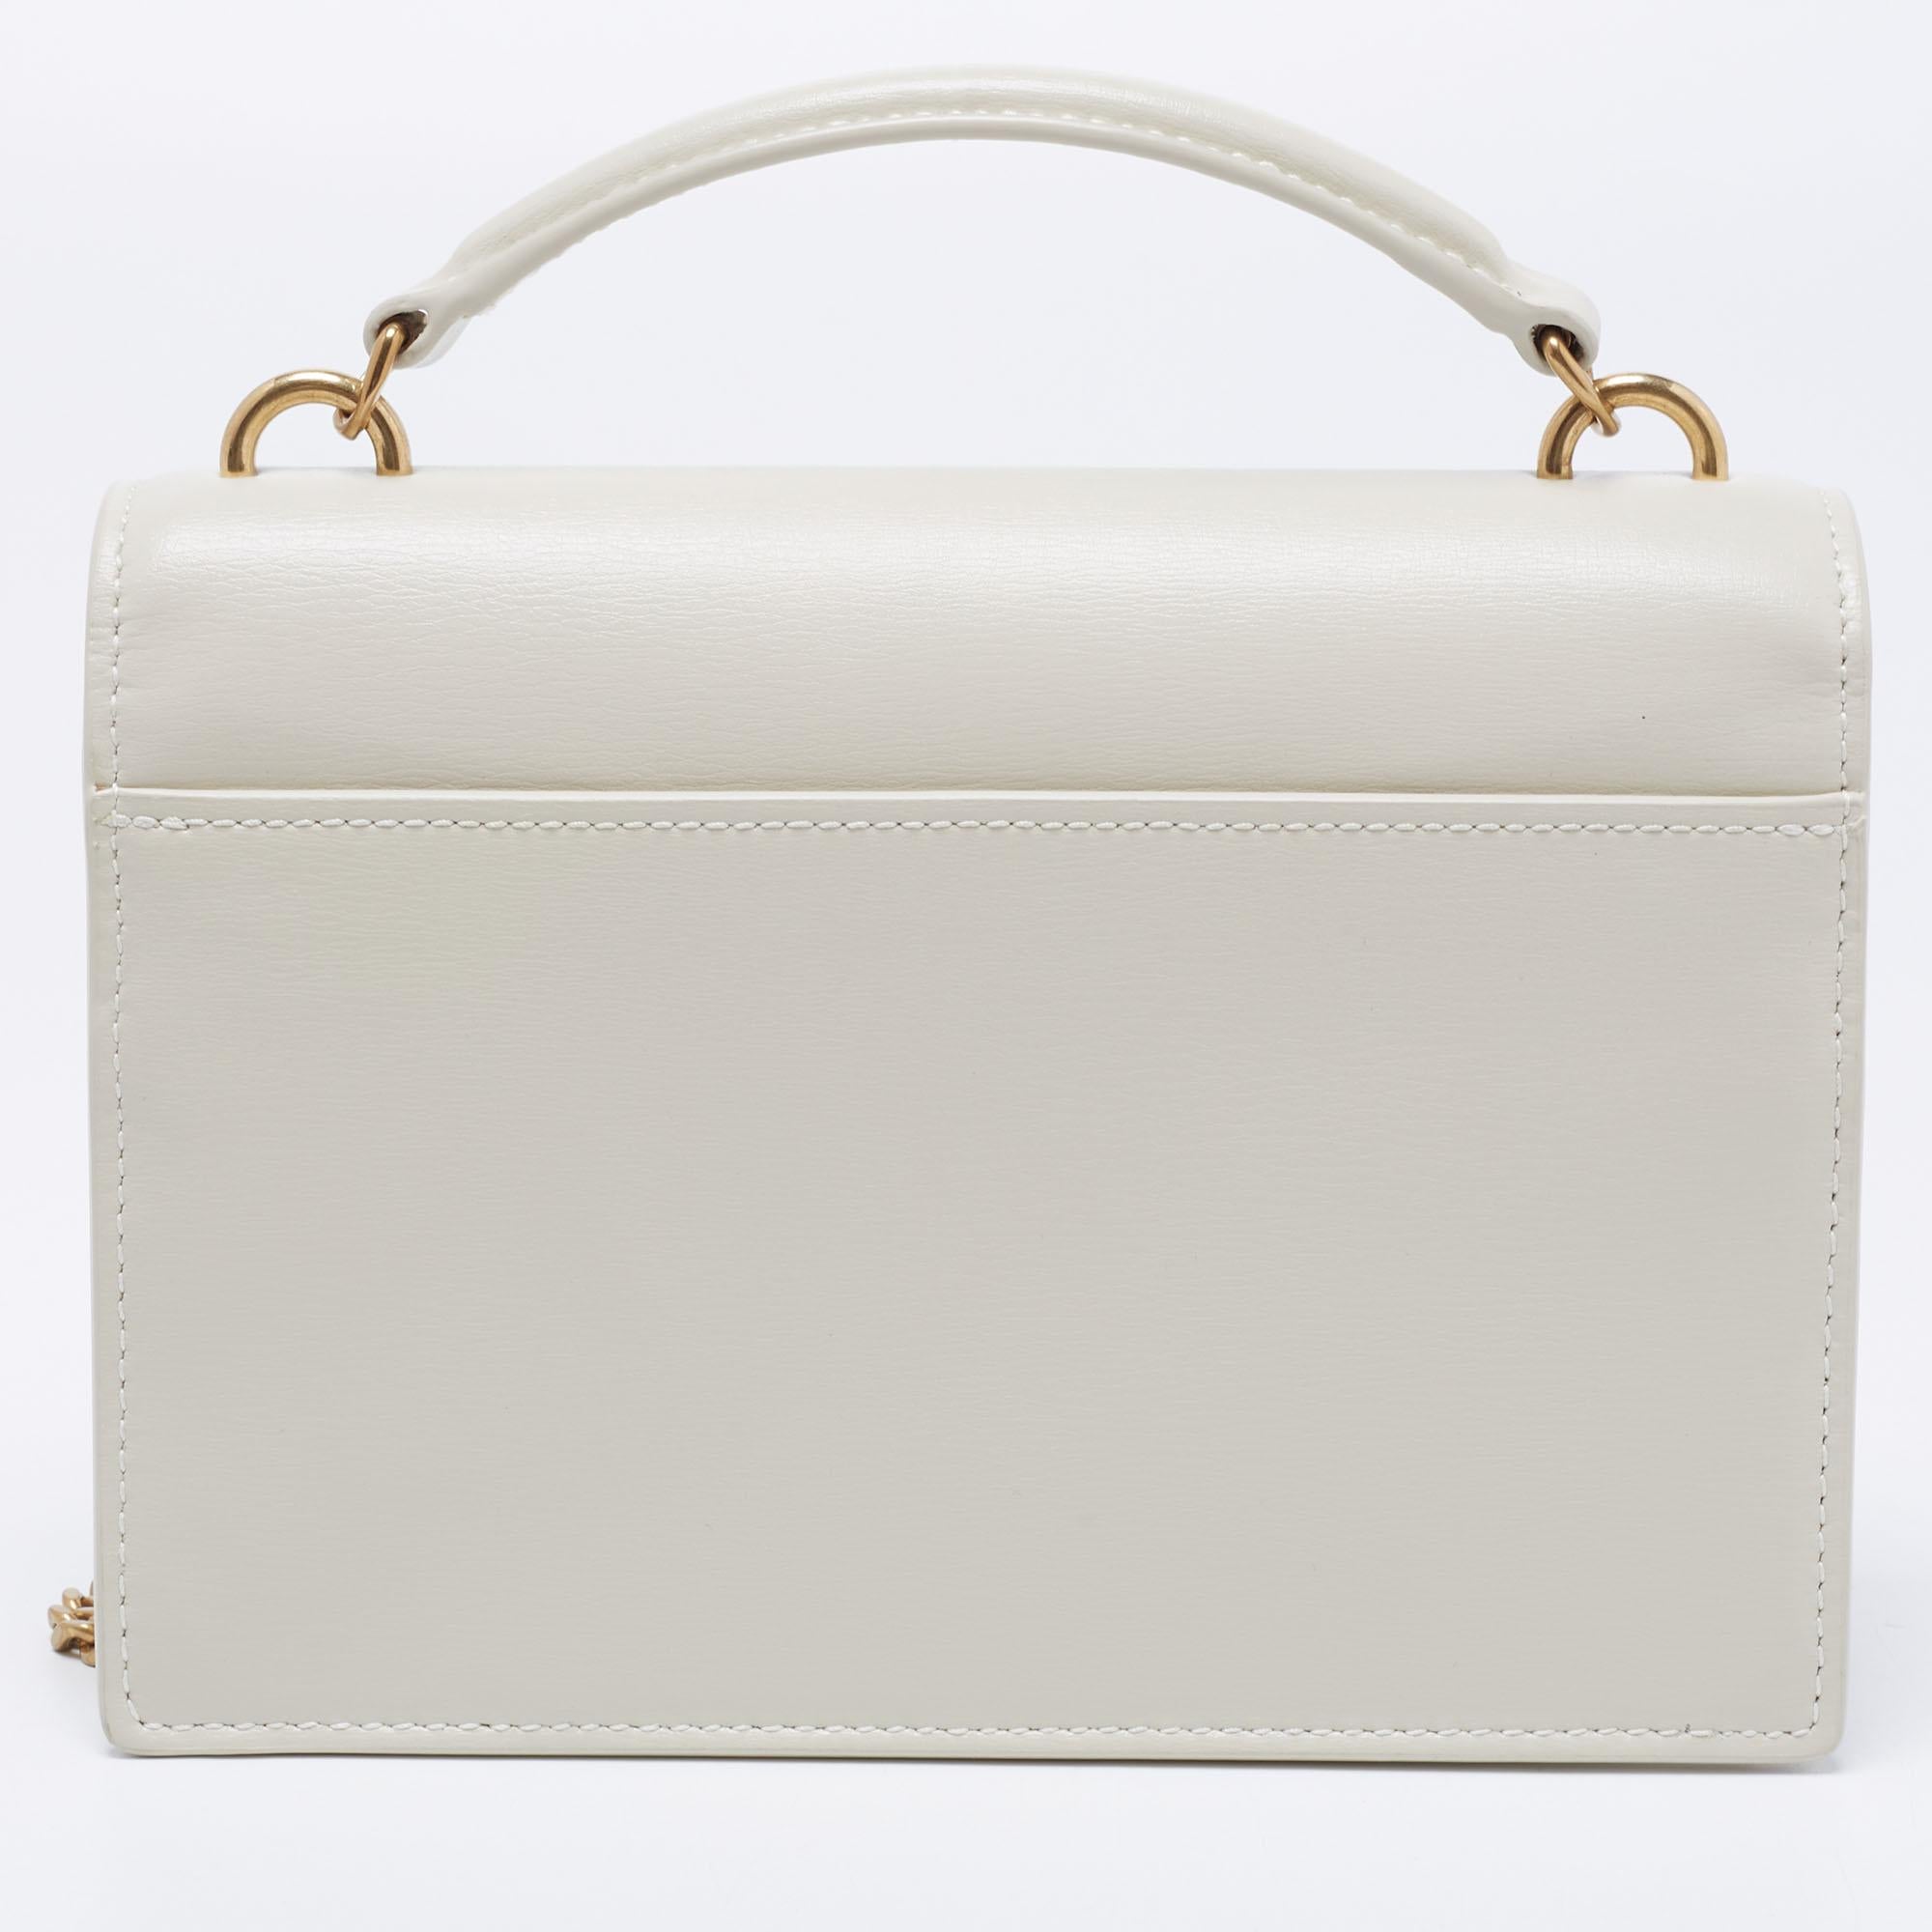 Fall in love with this Sunset bag from Saint Laurent! Crafted from quality leather, it flaunts the 'YSL' logo on the front flap in gold-tone metal. It has a spacious leather-lined interior that houses pockets. This off-white beauty is complete with